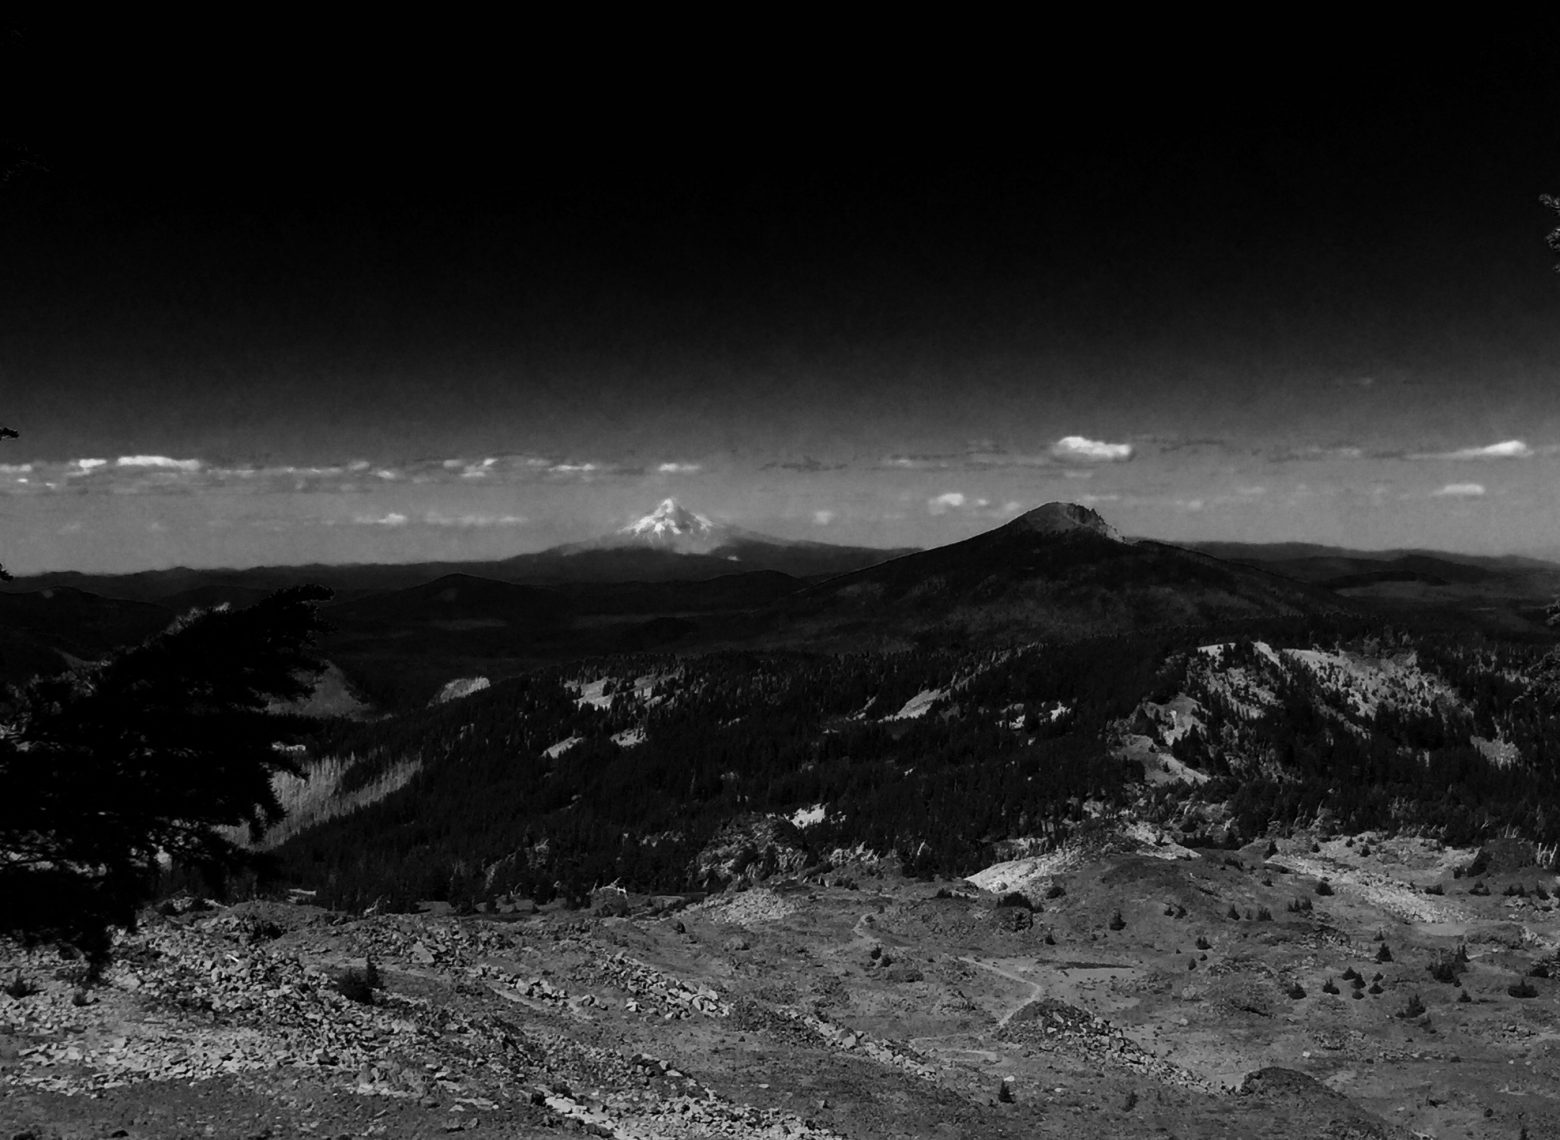 Looking out into the distance and the first view of Mt. Hood